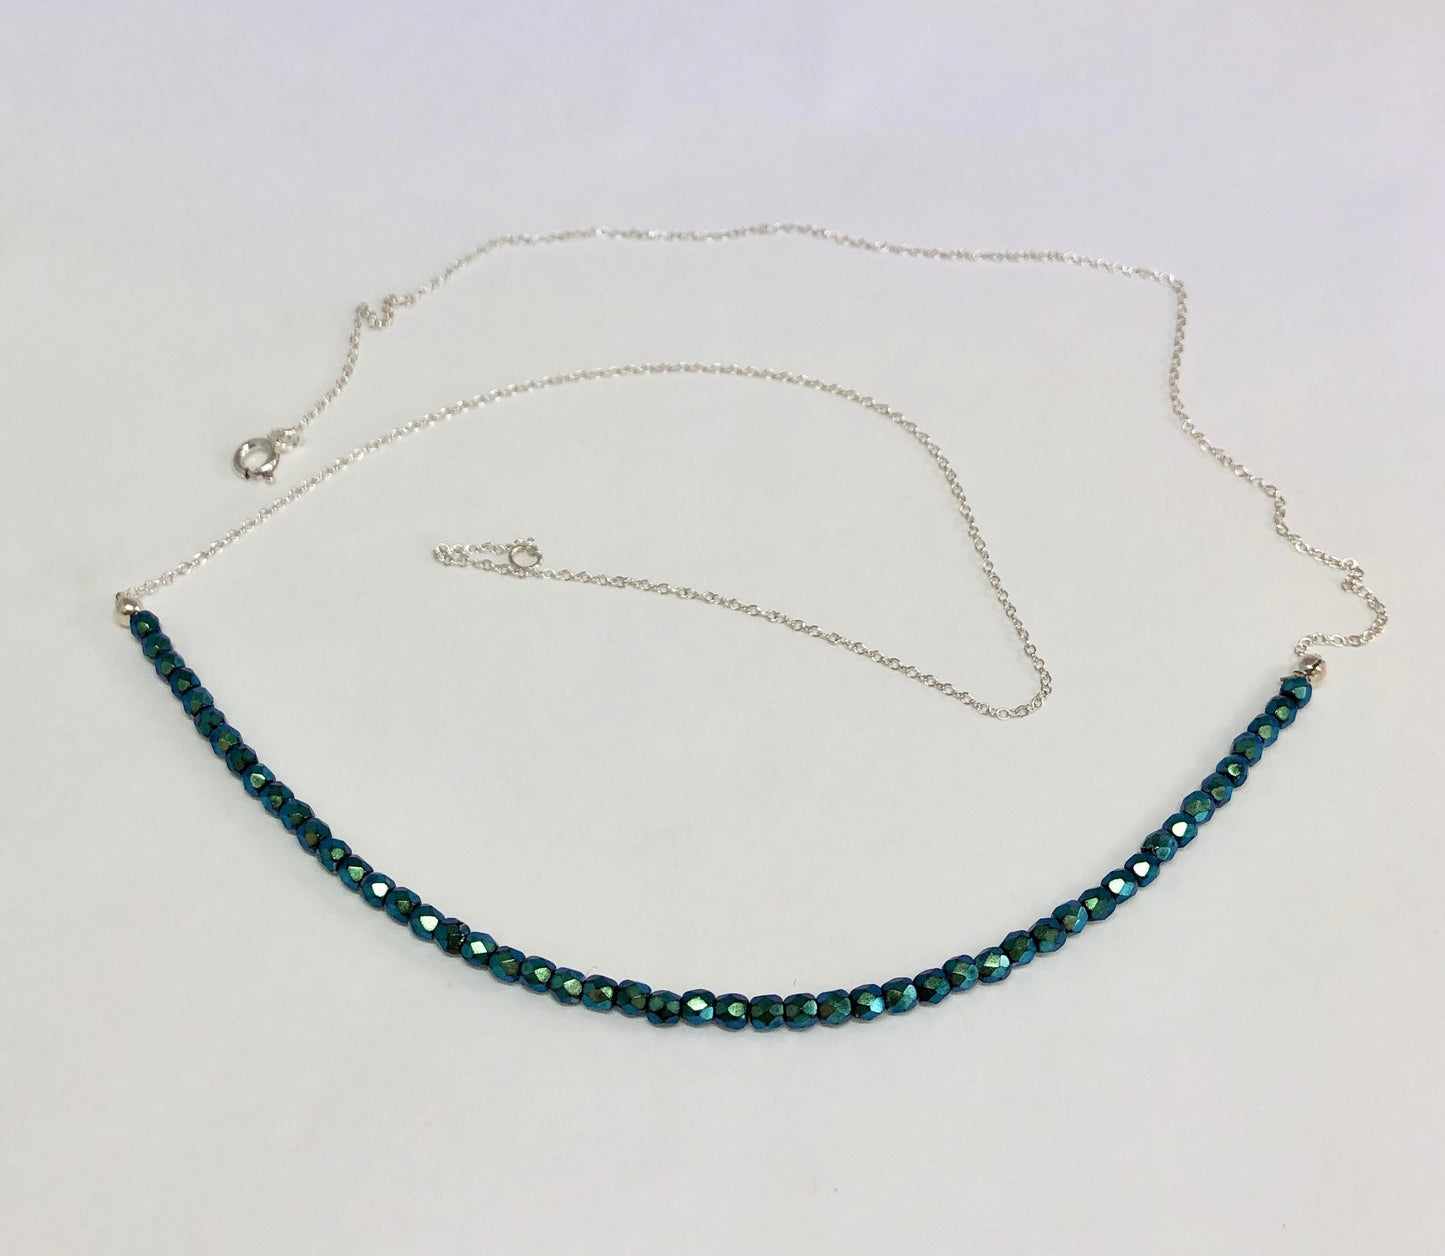 Emerald green crystal and sterling silver choker necklace.